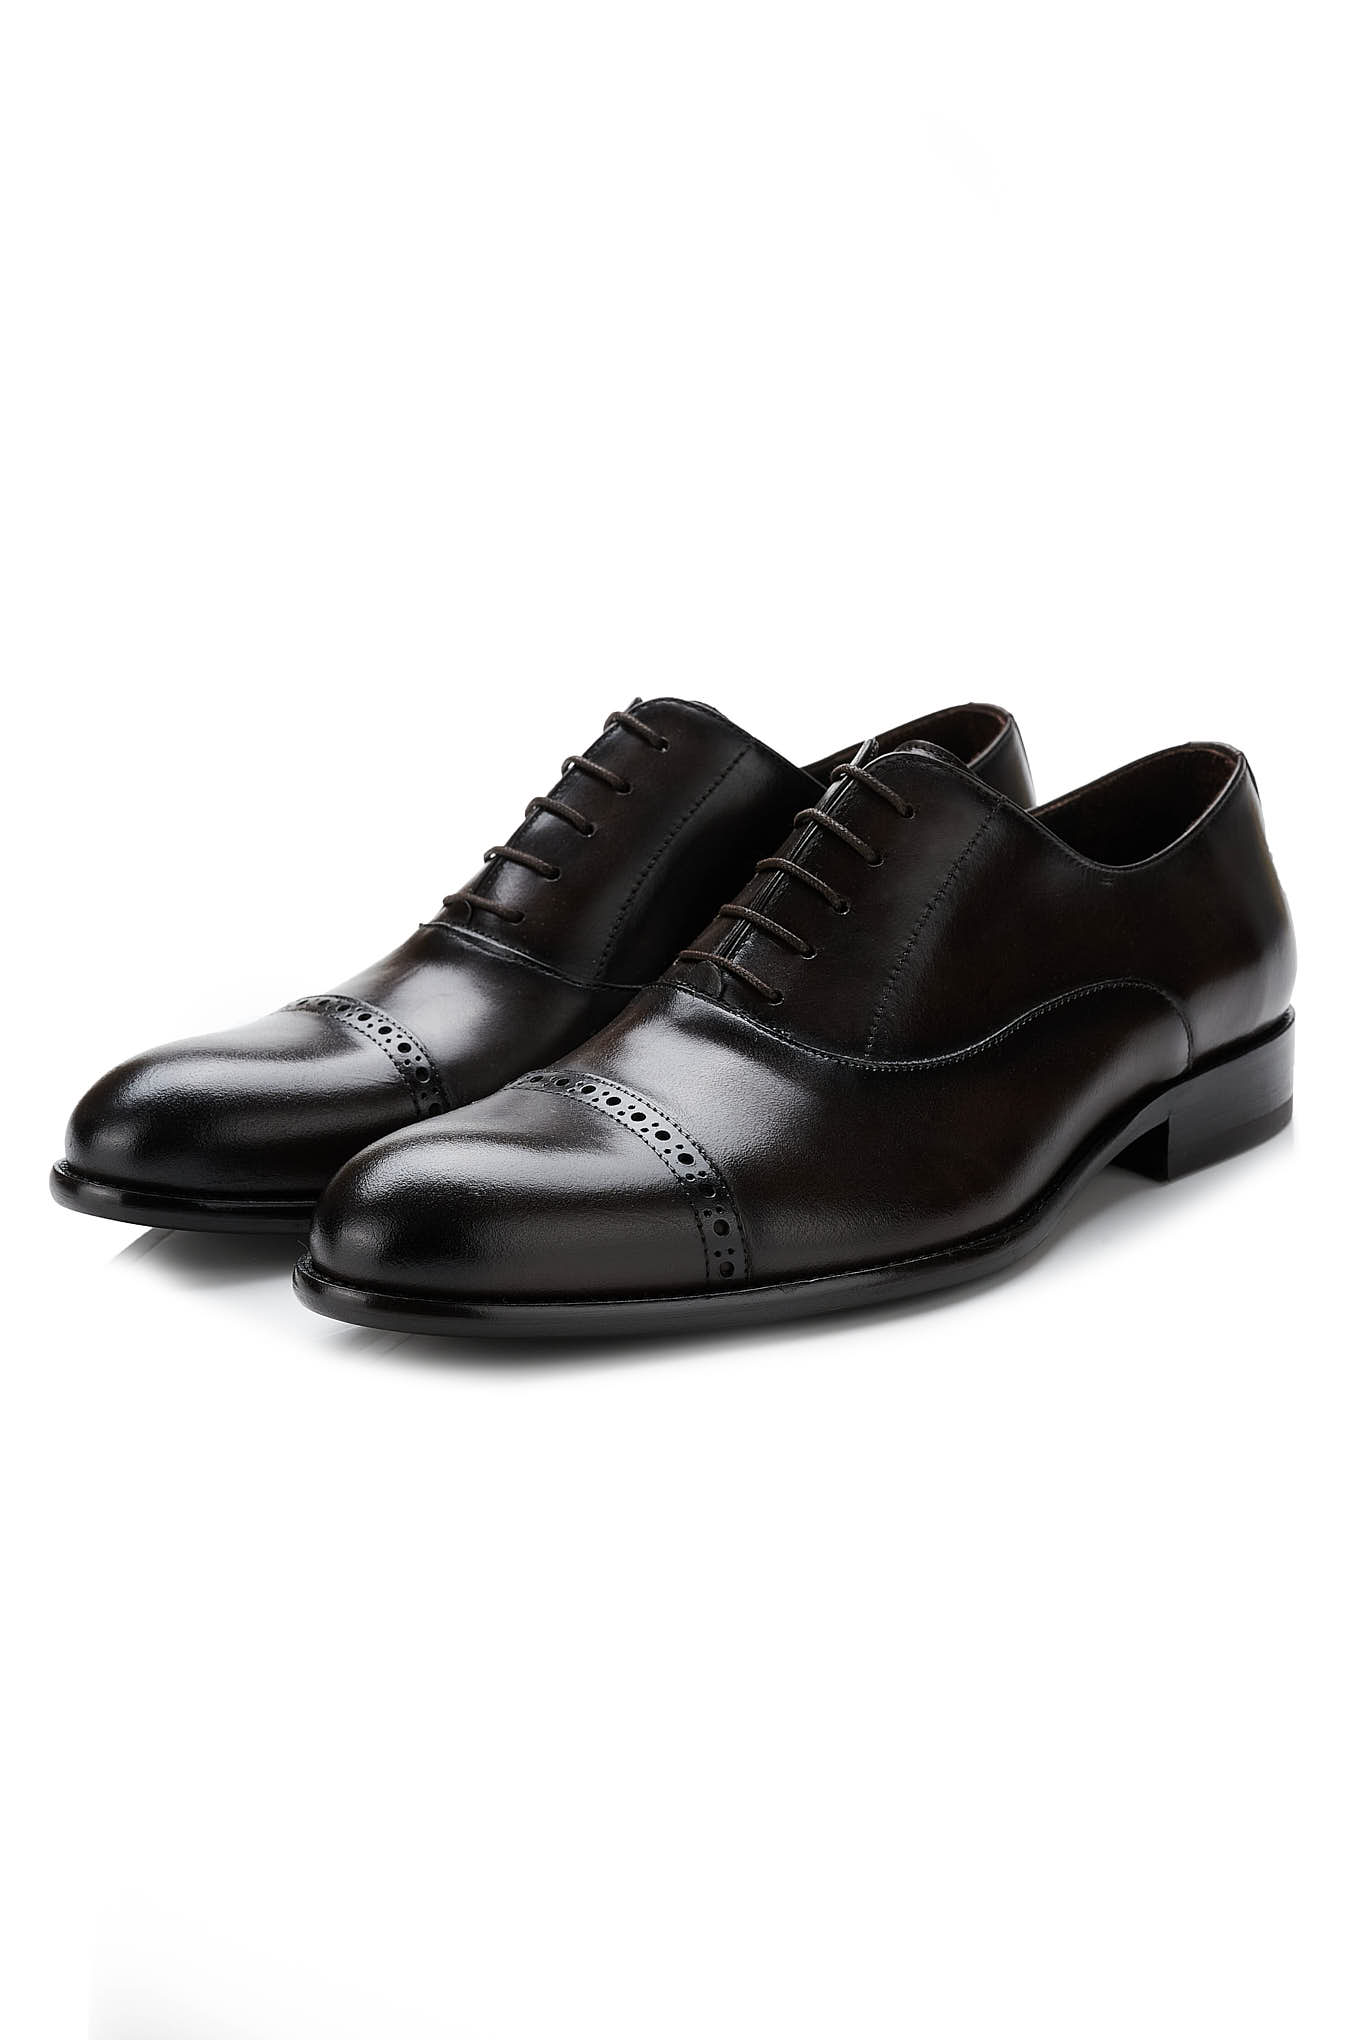 Shoes Chocolate Formal Man